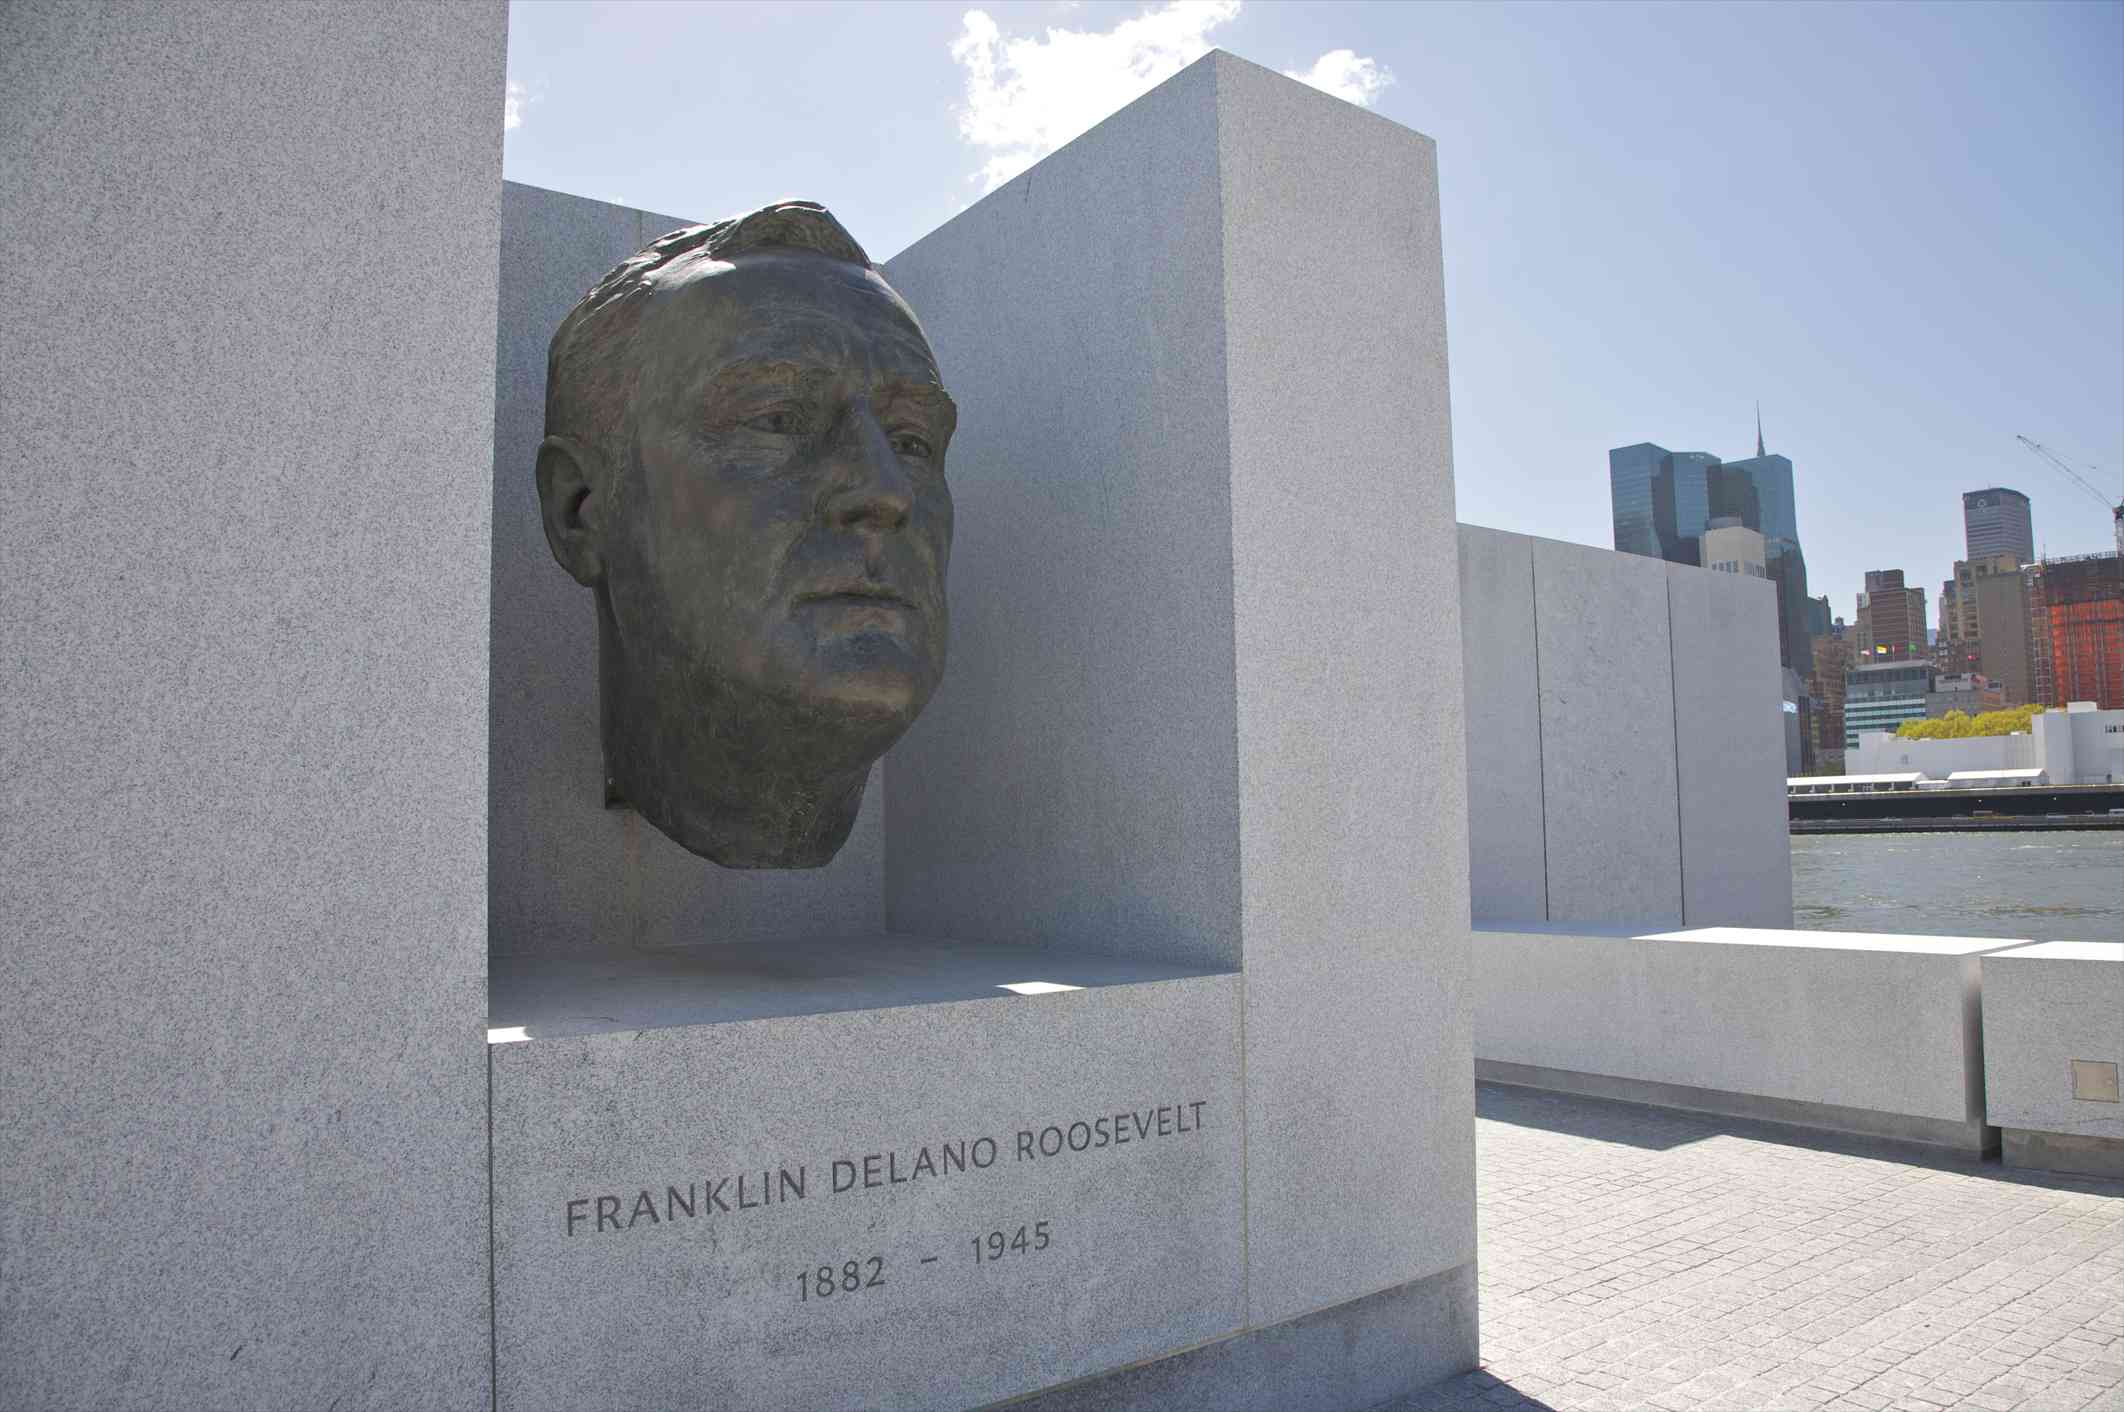 Sculpture by Jo Davidson at Franklin D. Roosevelt Four Freedoms Park, Roosevelt Island, New York City. Designed by architect Louis I. Kahn, the park is an inspiring civic space.